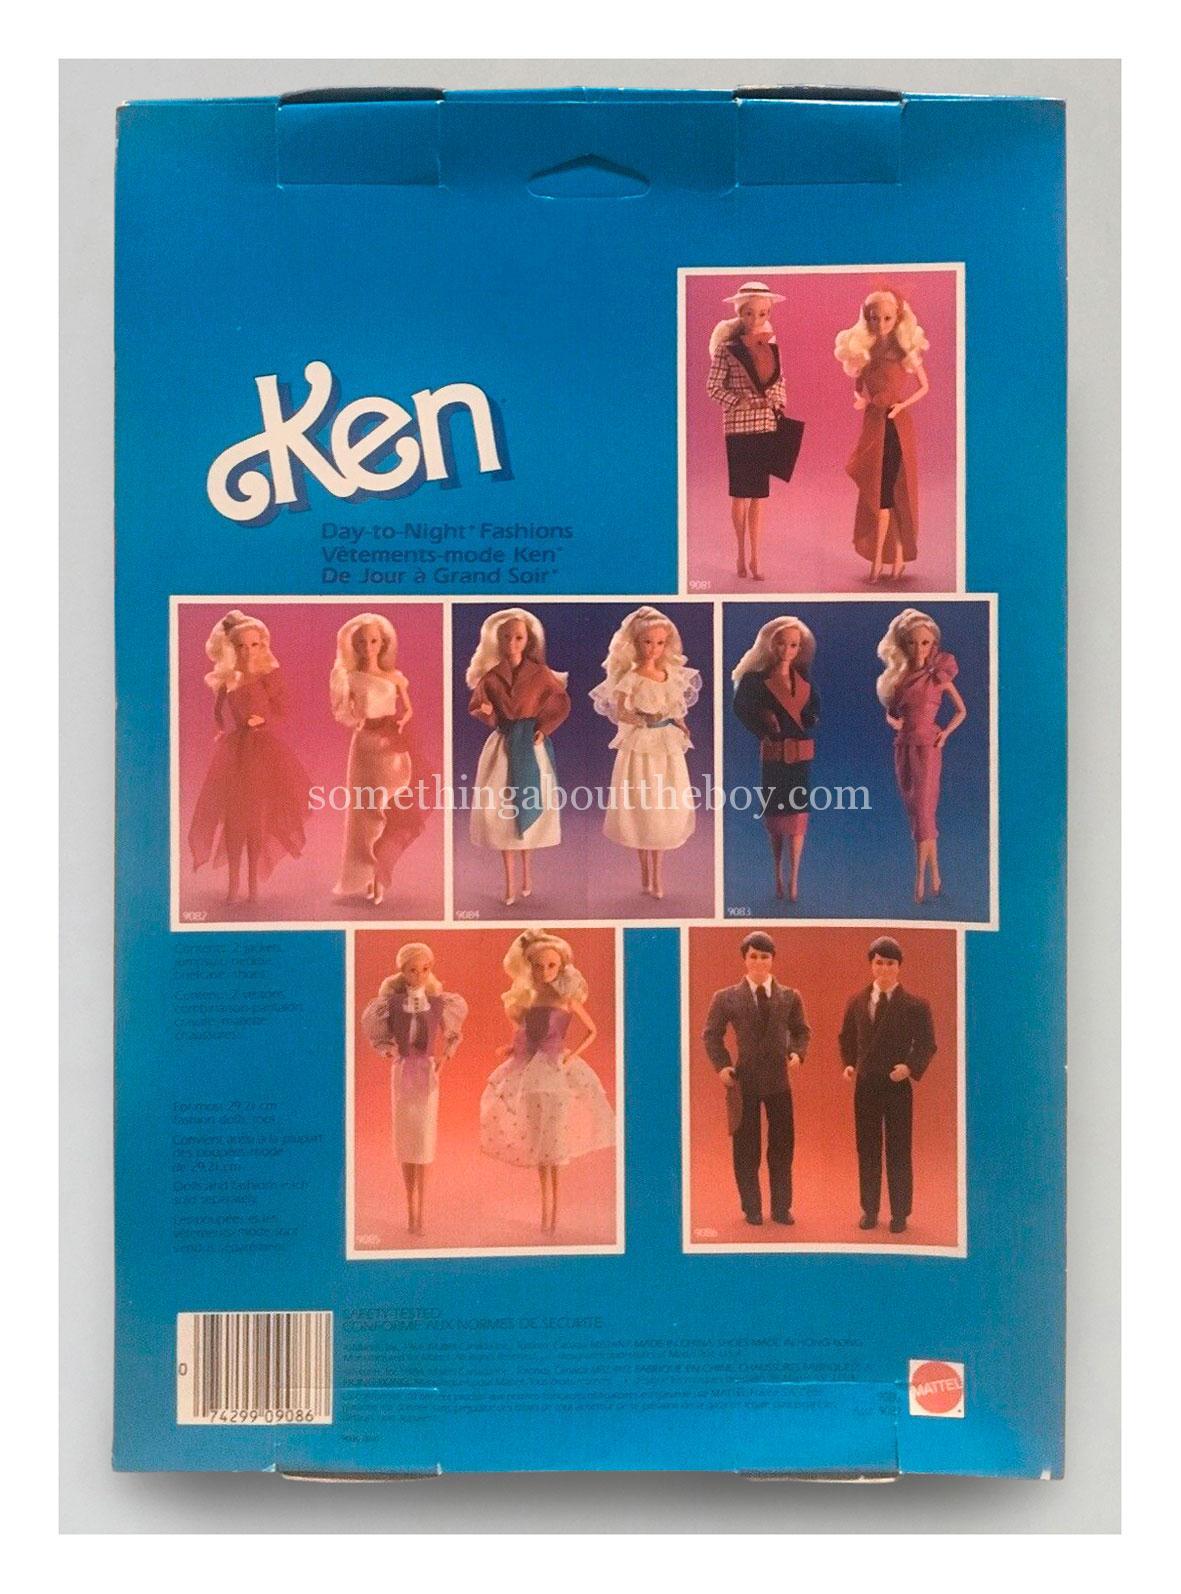 1985 Day-to-Night Fashions #9086 Canadian version packaging